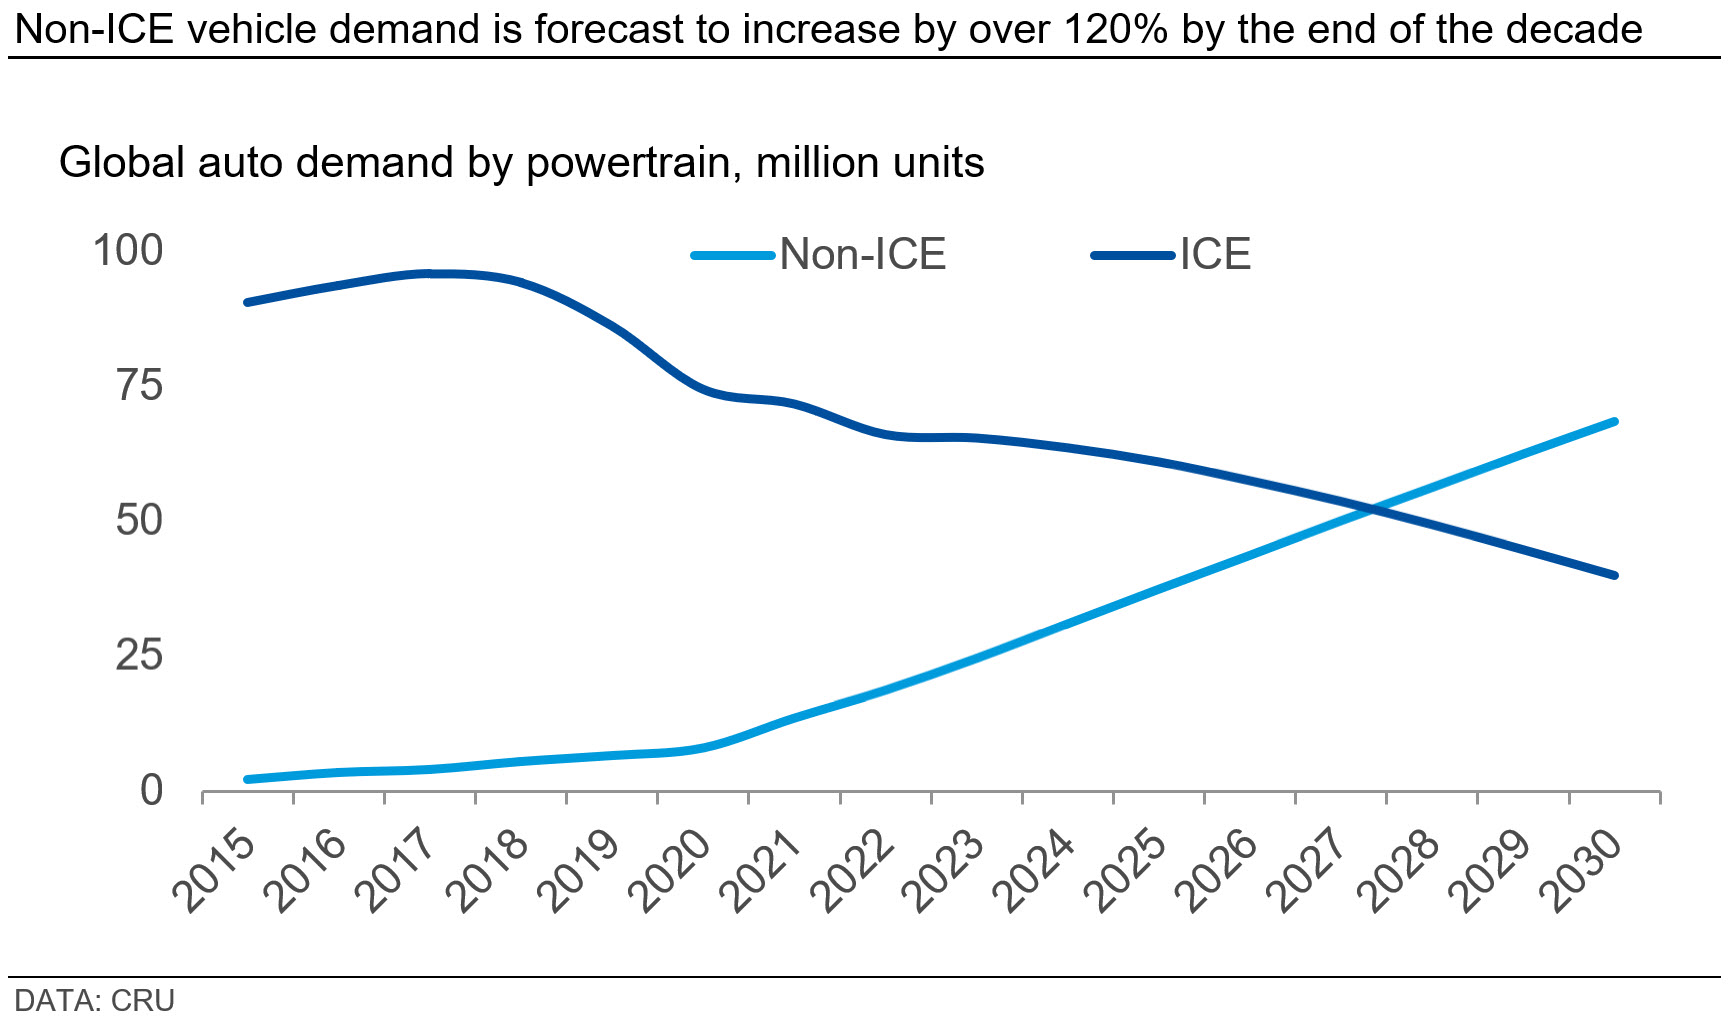 Data on Non-ICE and ICE